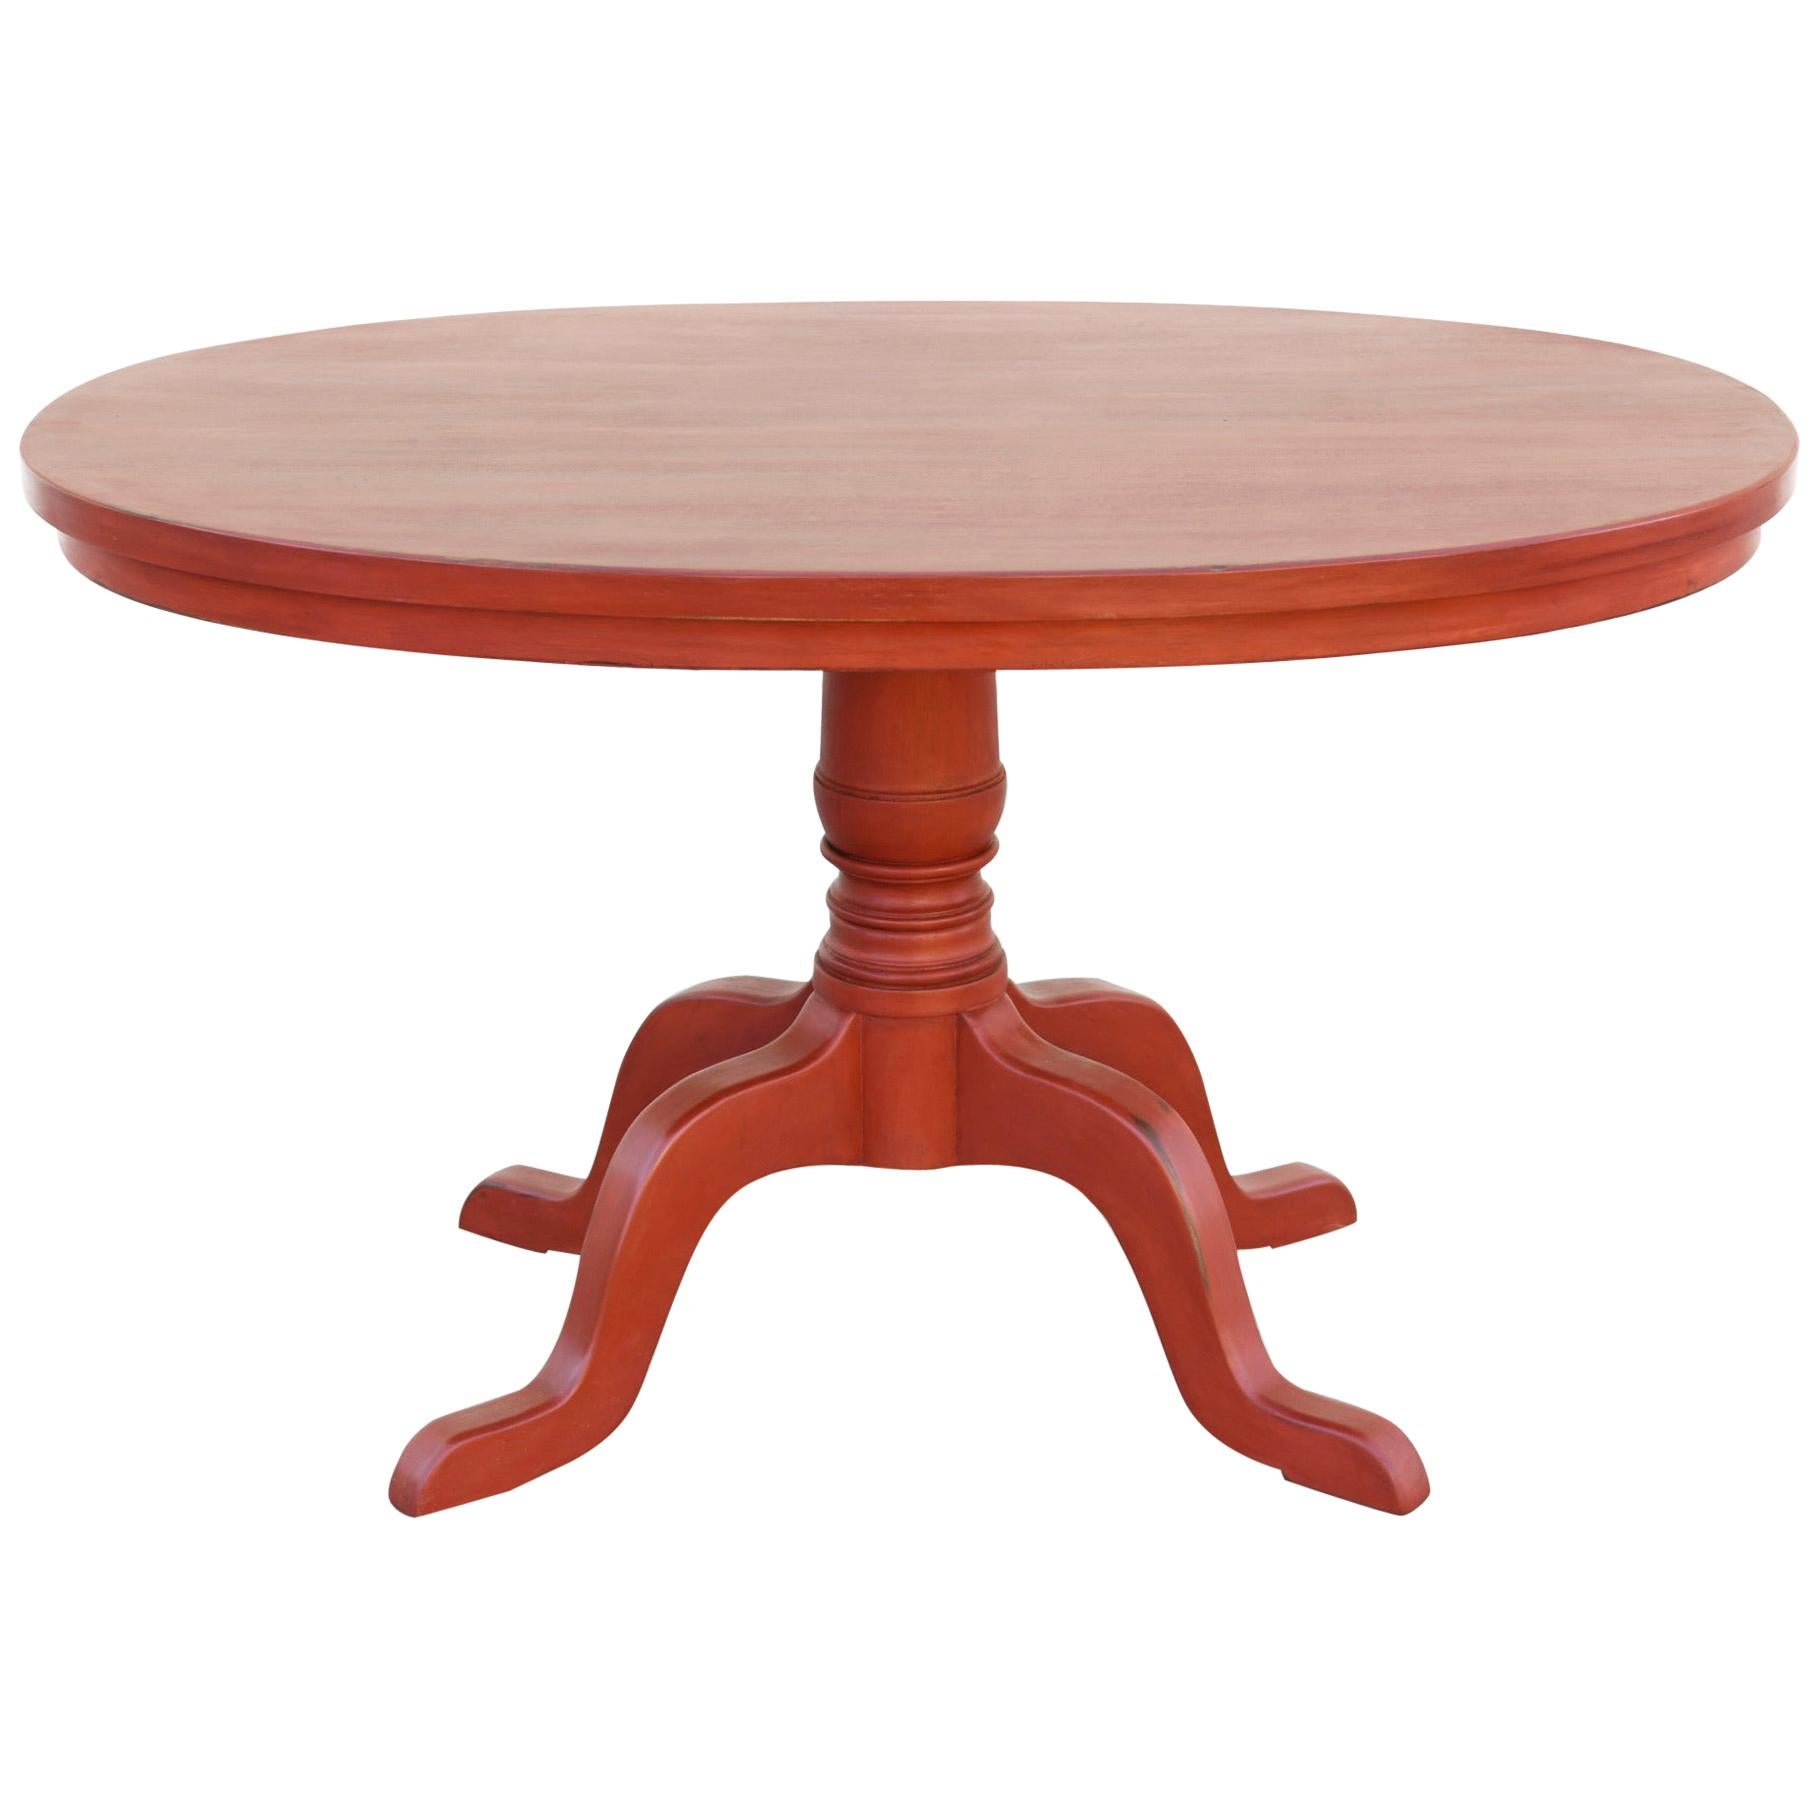 Custom Orange Painted Pedestal Table, Made to Order by Petersen Antiques For Sale